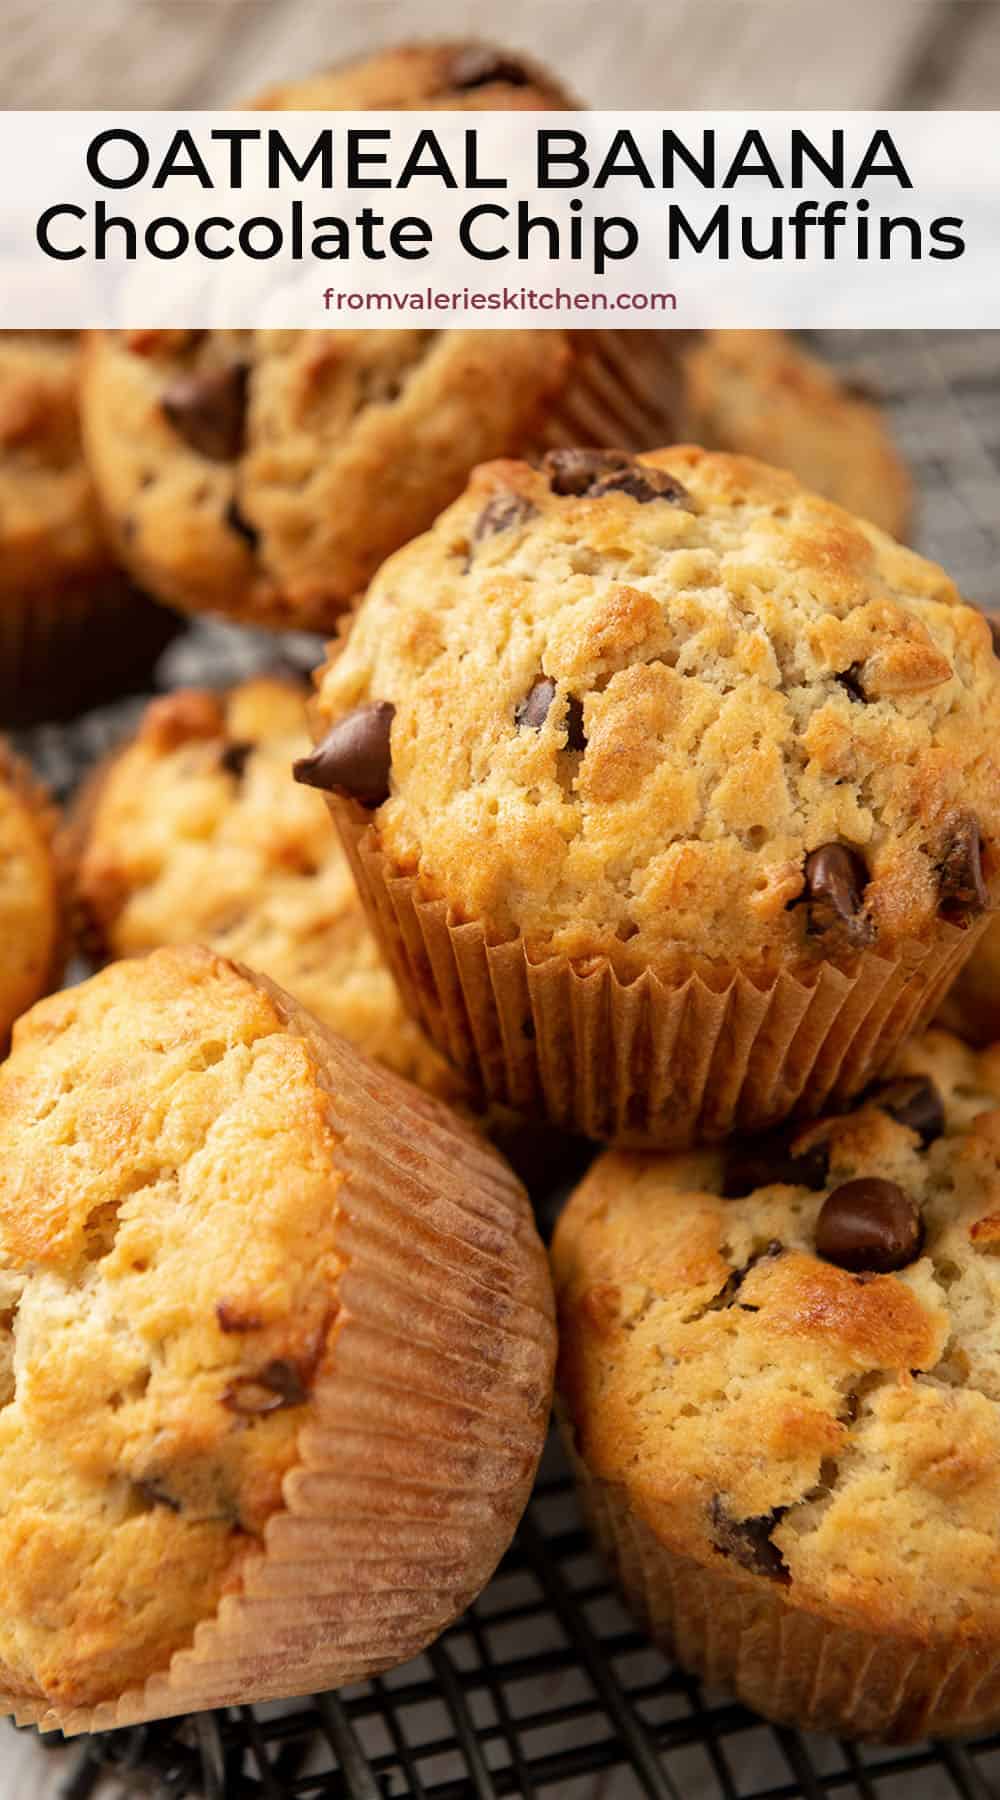 A pile of Oatmeal Banana Muffins with Chocolate Chips with text overlay.